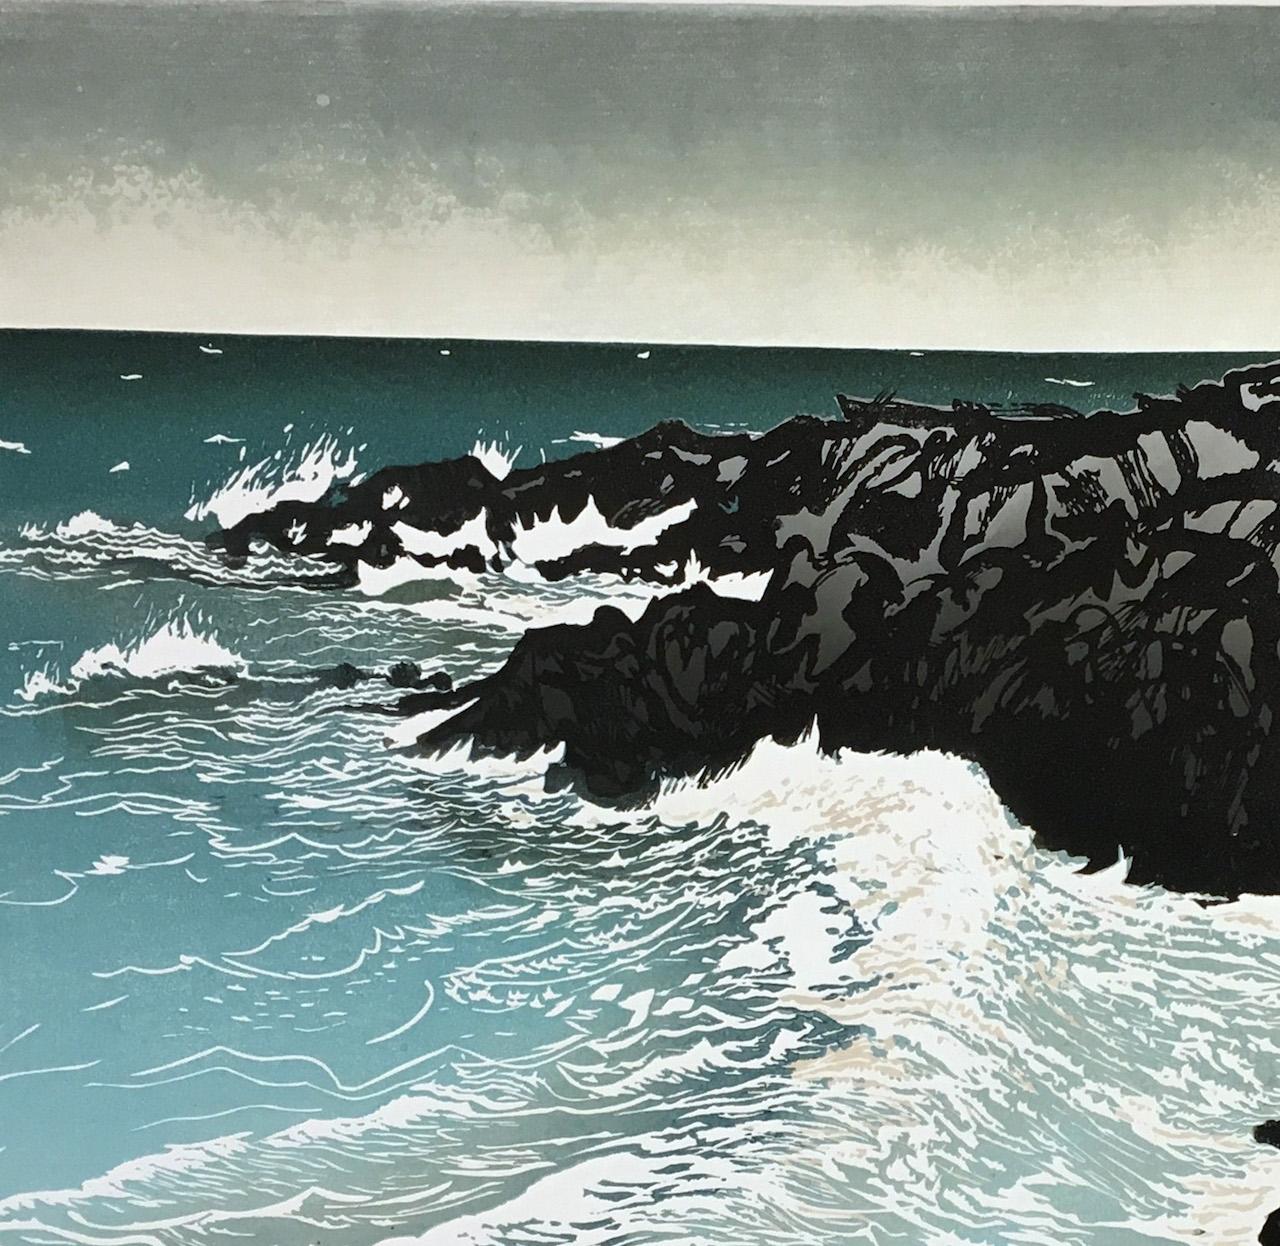 Ian Phillips
North Shore Swell
Limited Edition Linocut Print on Paper
Edition of 12
Image Size: H 70cm x W 88.2cm x D 0.01cm
Sold Unframed
Free Shipping
Please note that in situ images are purely an indication of how a piece may look.

North Shore